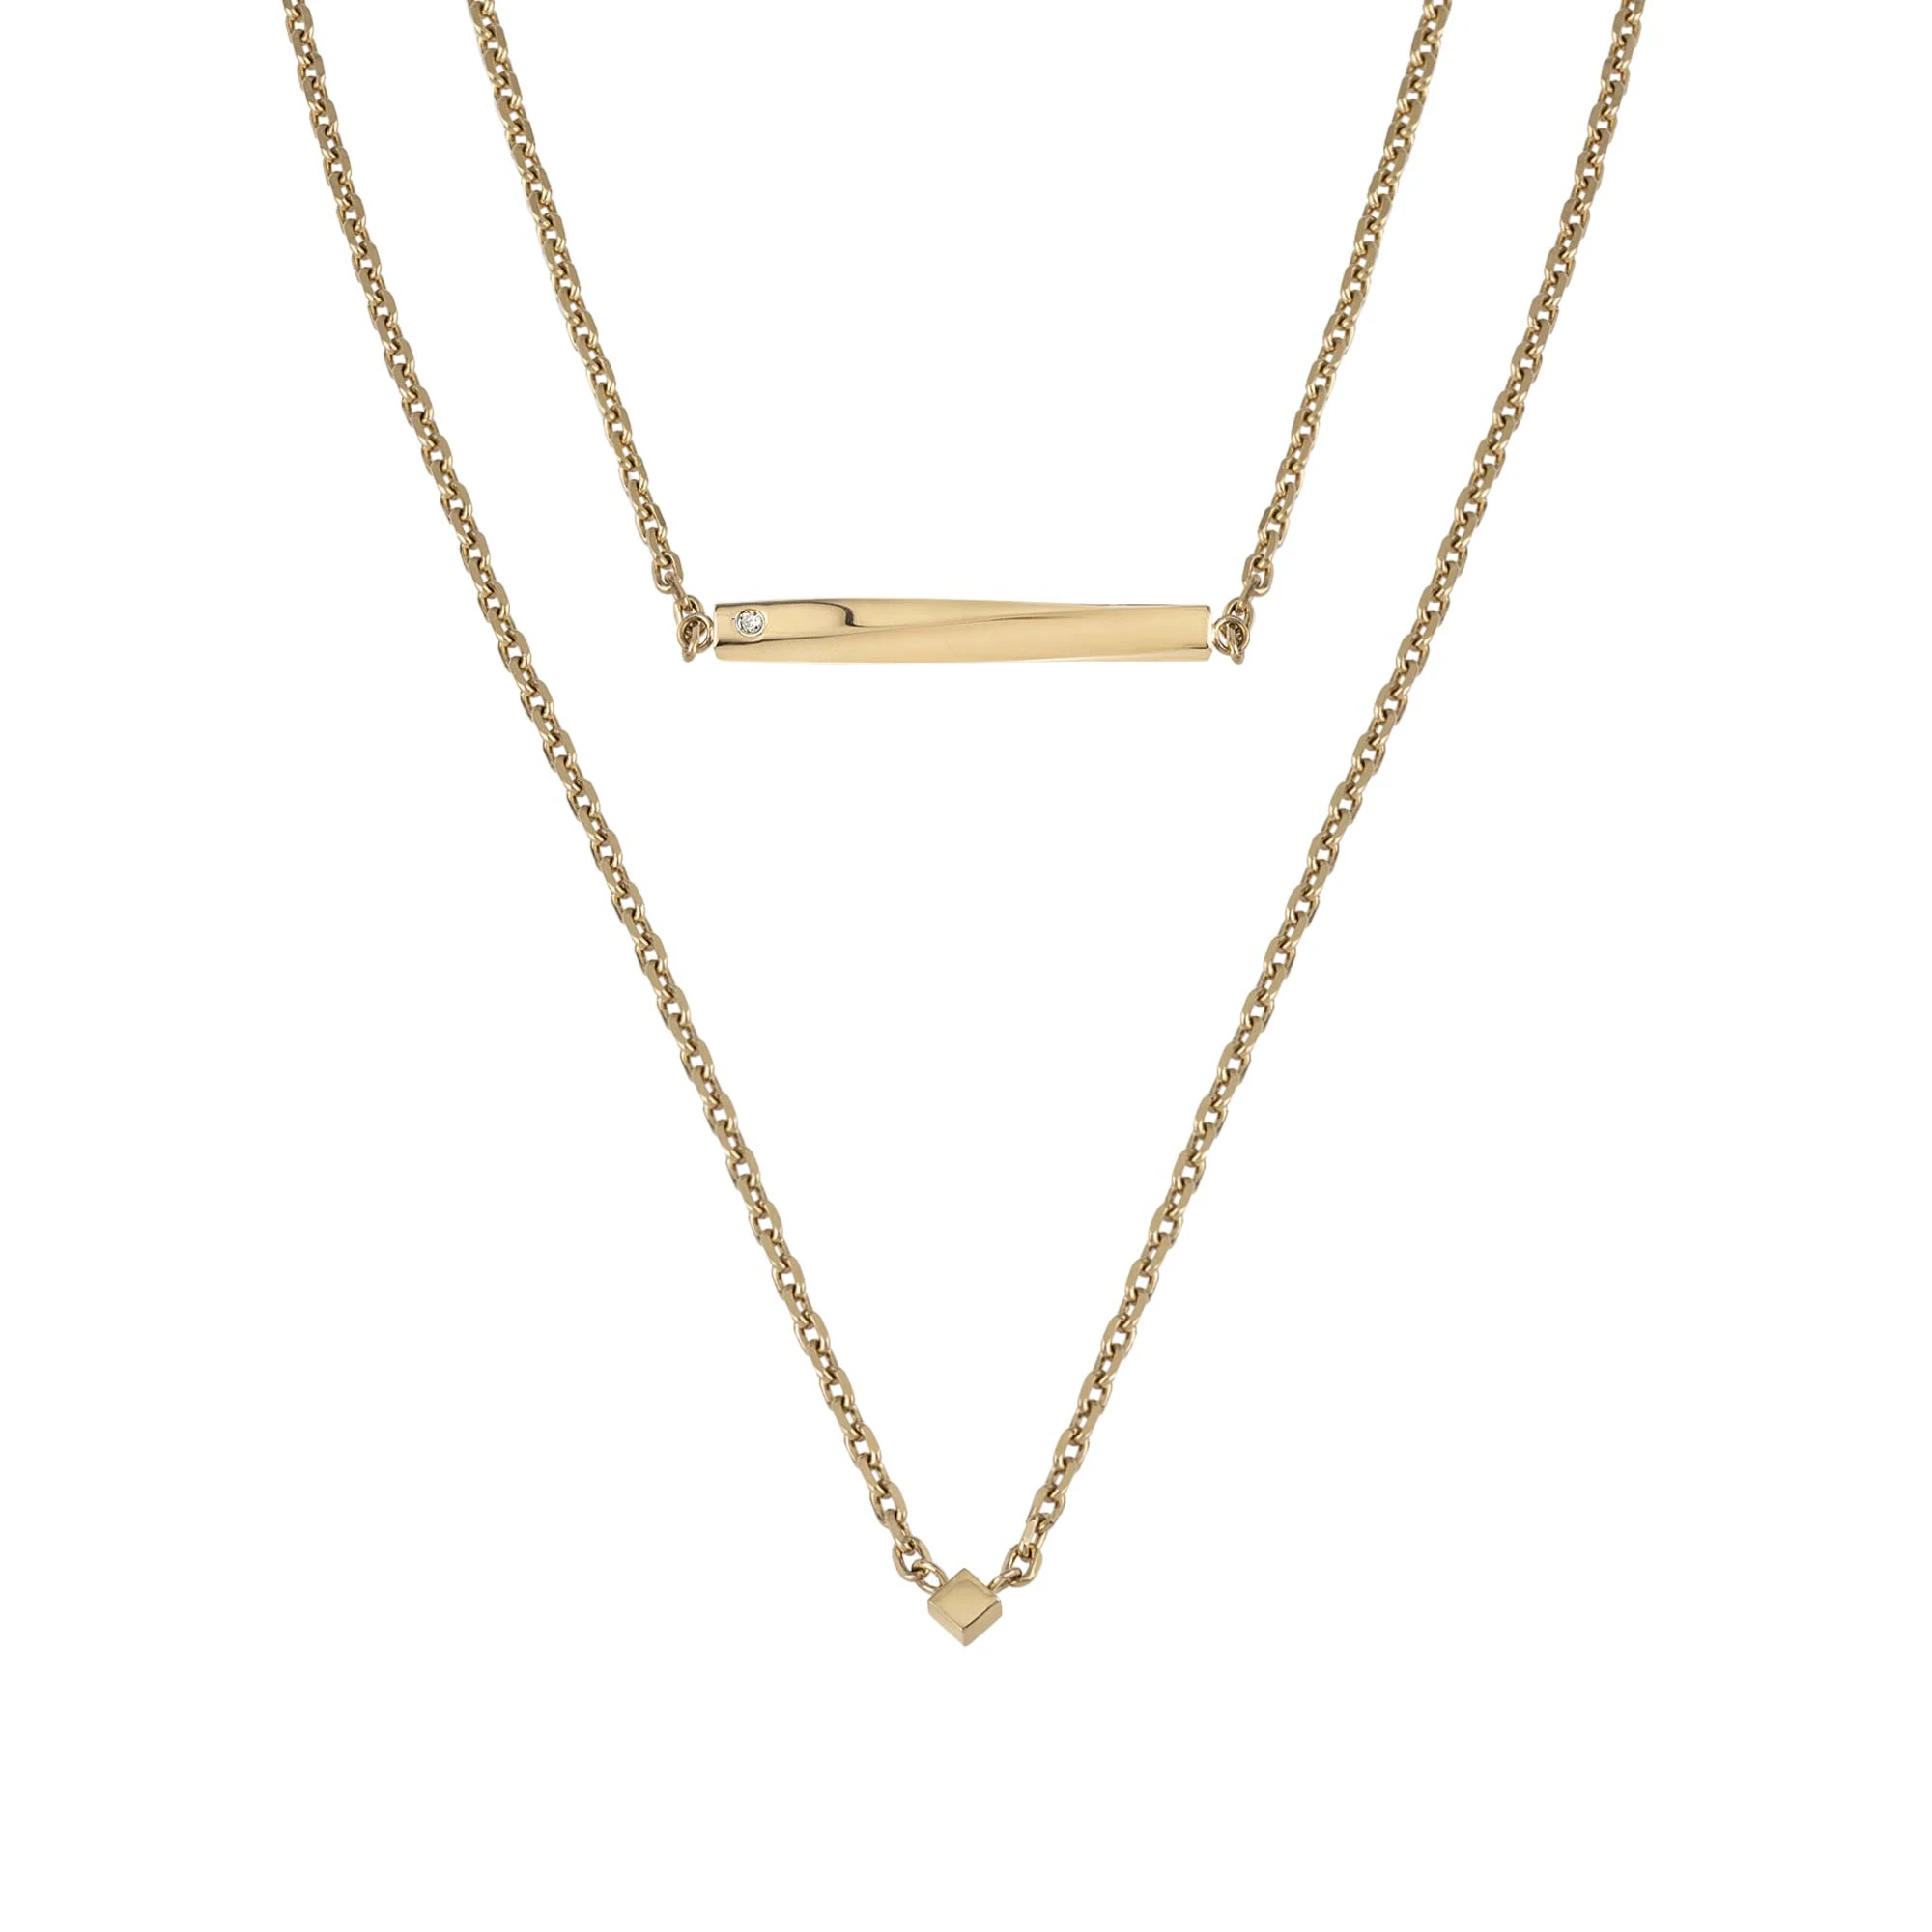 B ESSENTIAL - IP GOLD STEEL NECKLACE WITH NATURAL DIAMOND - 1 - TJ3010 | Breil